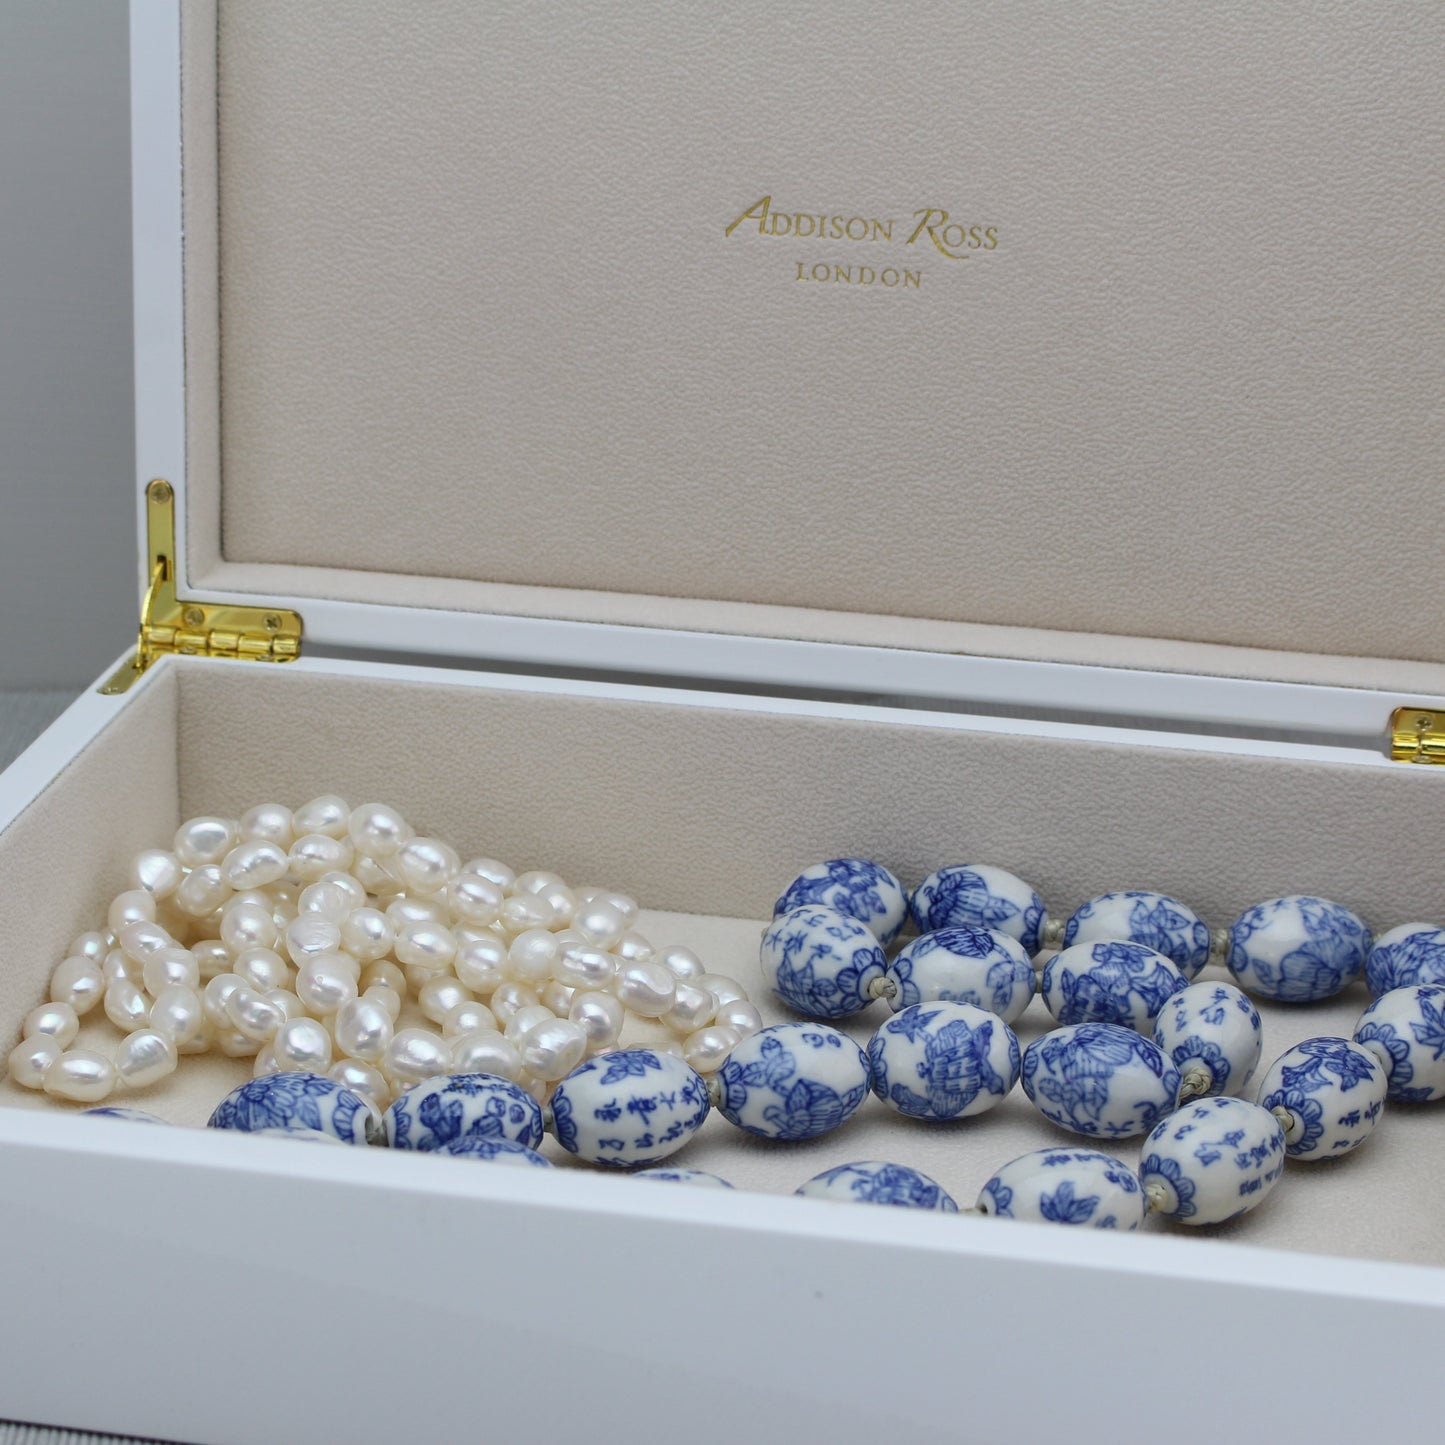 Two necklaces in a white storage box